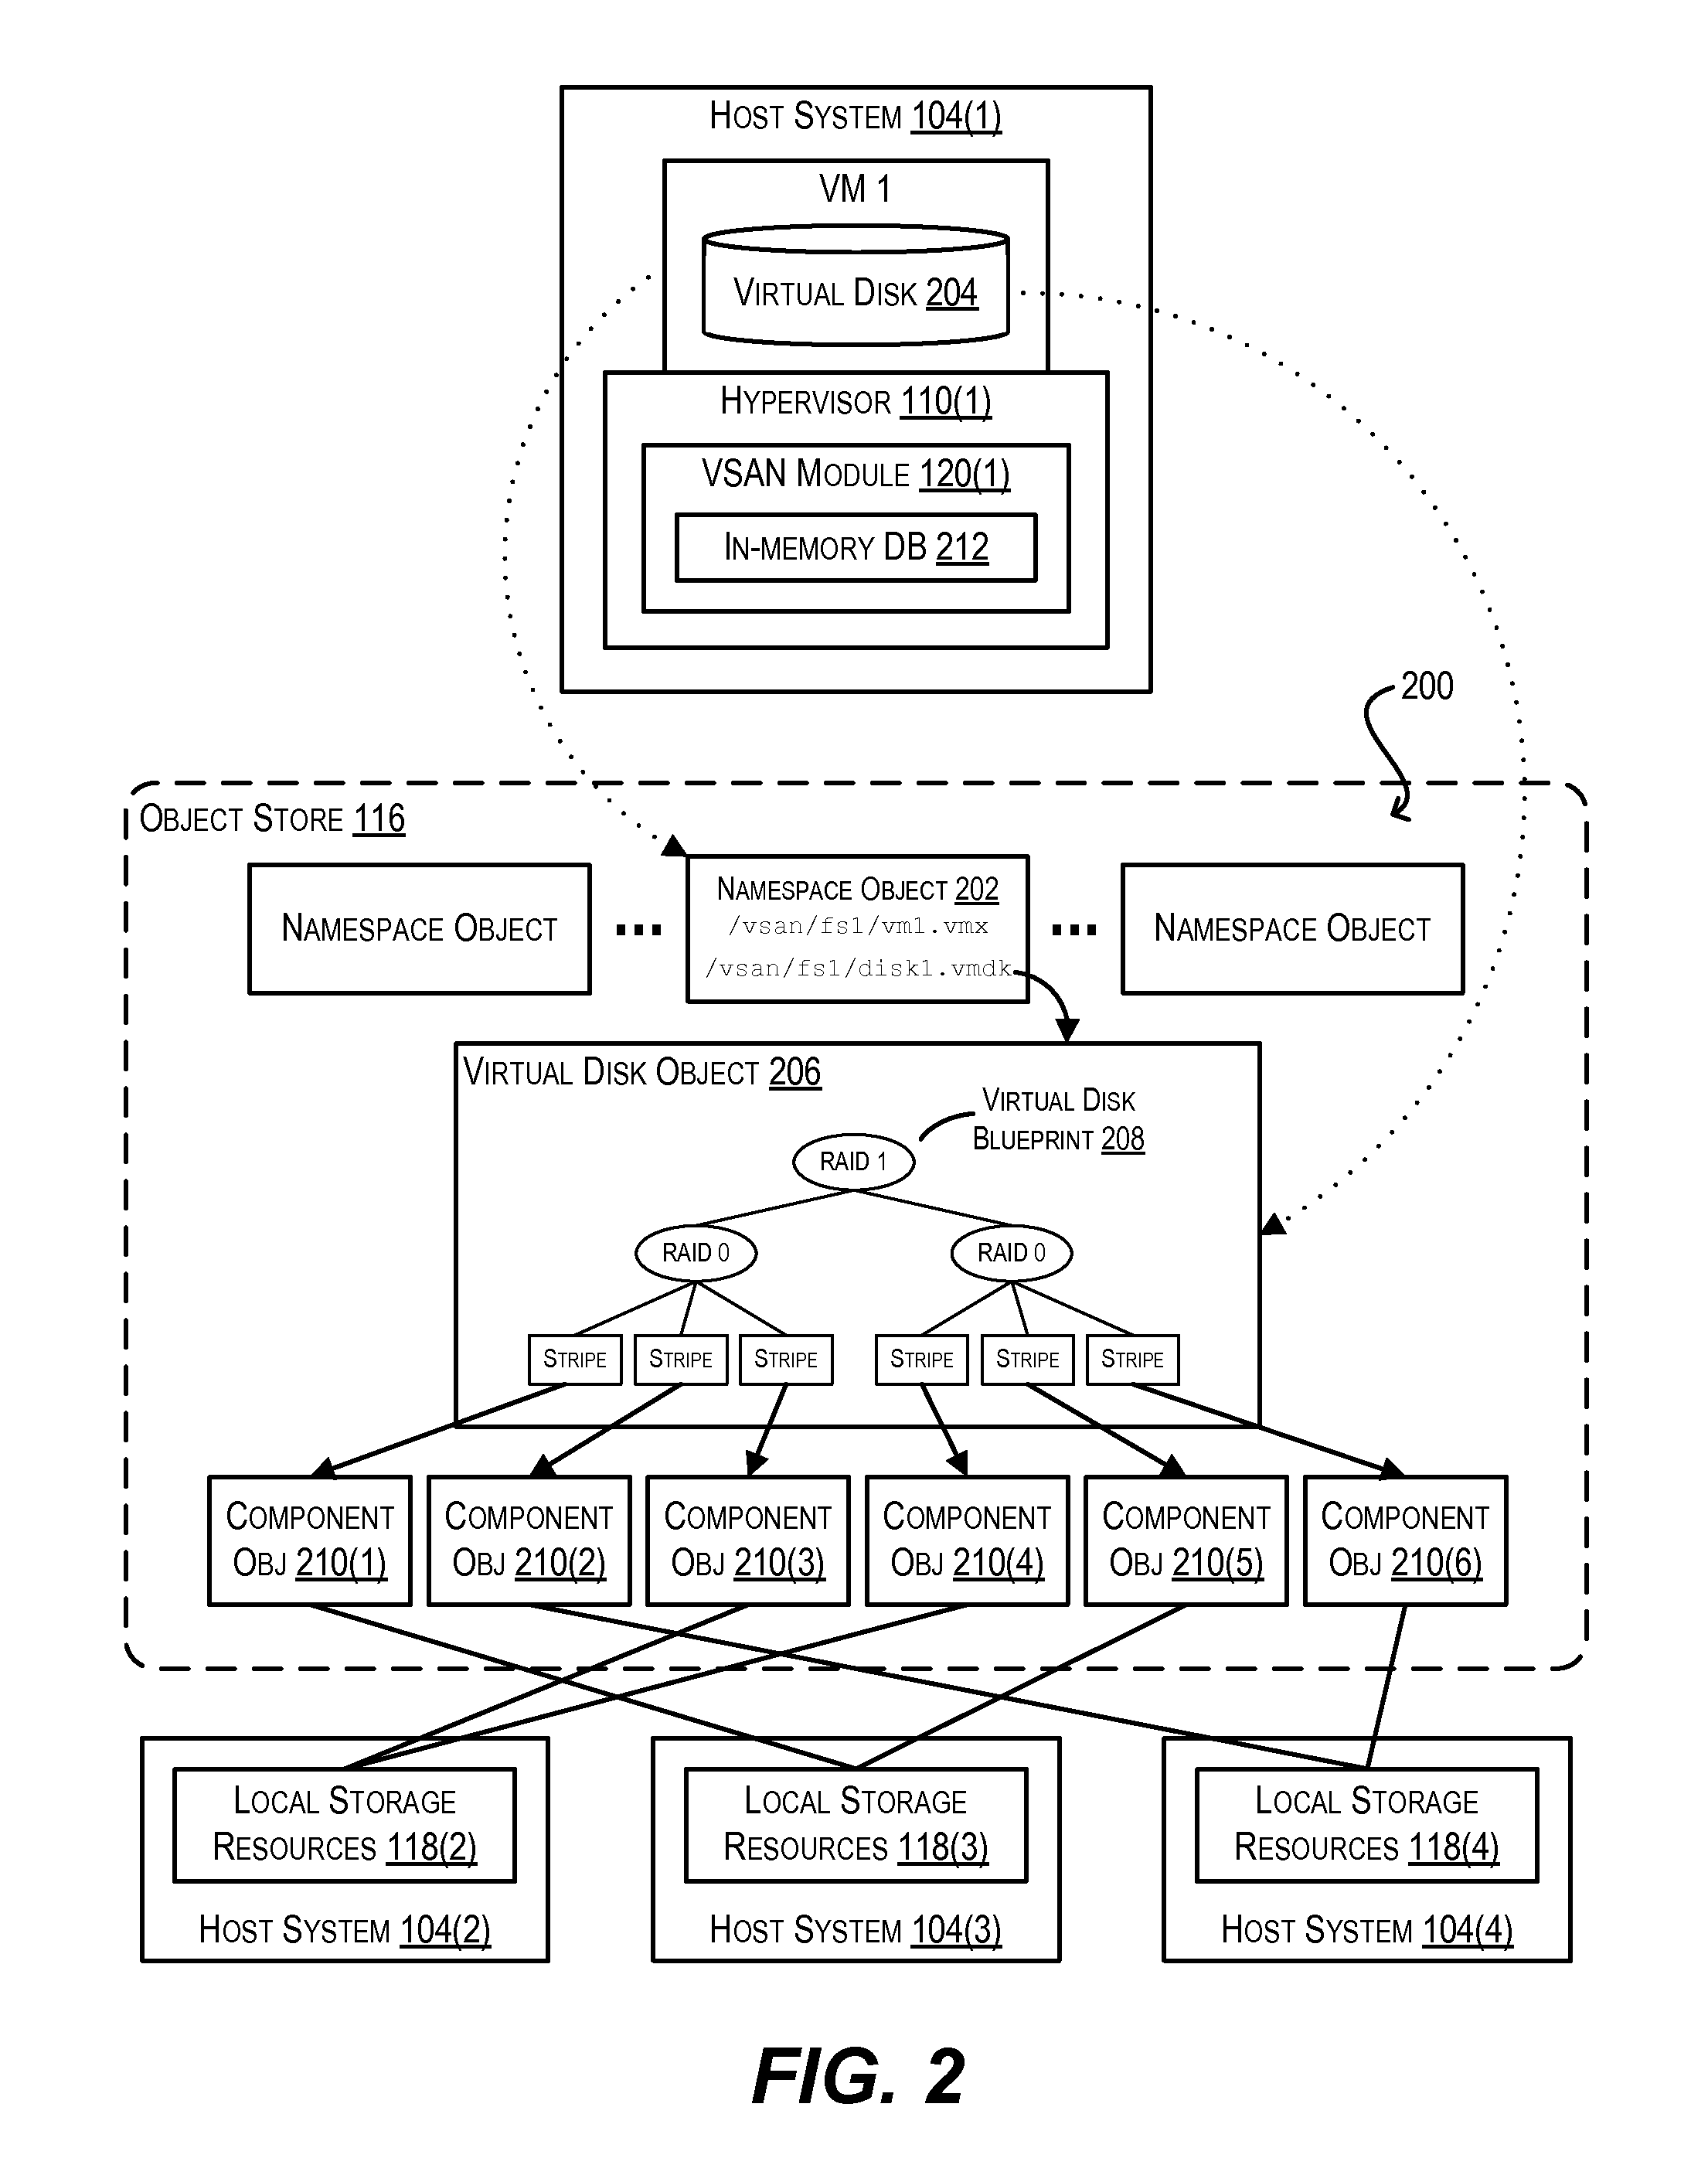 Maintaining high availability during network partitions for virtual machines stored on distributed object-based storage